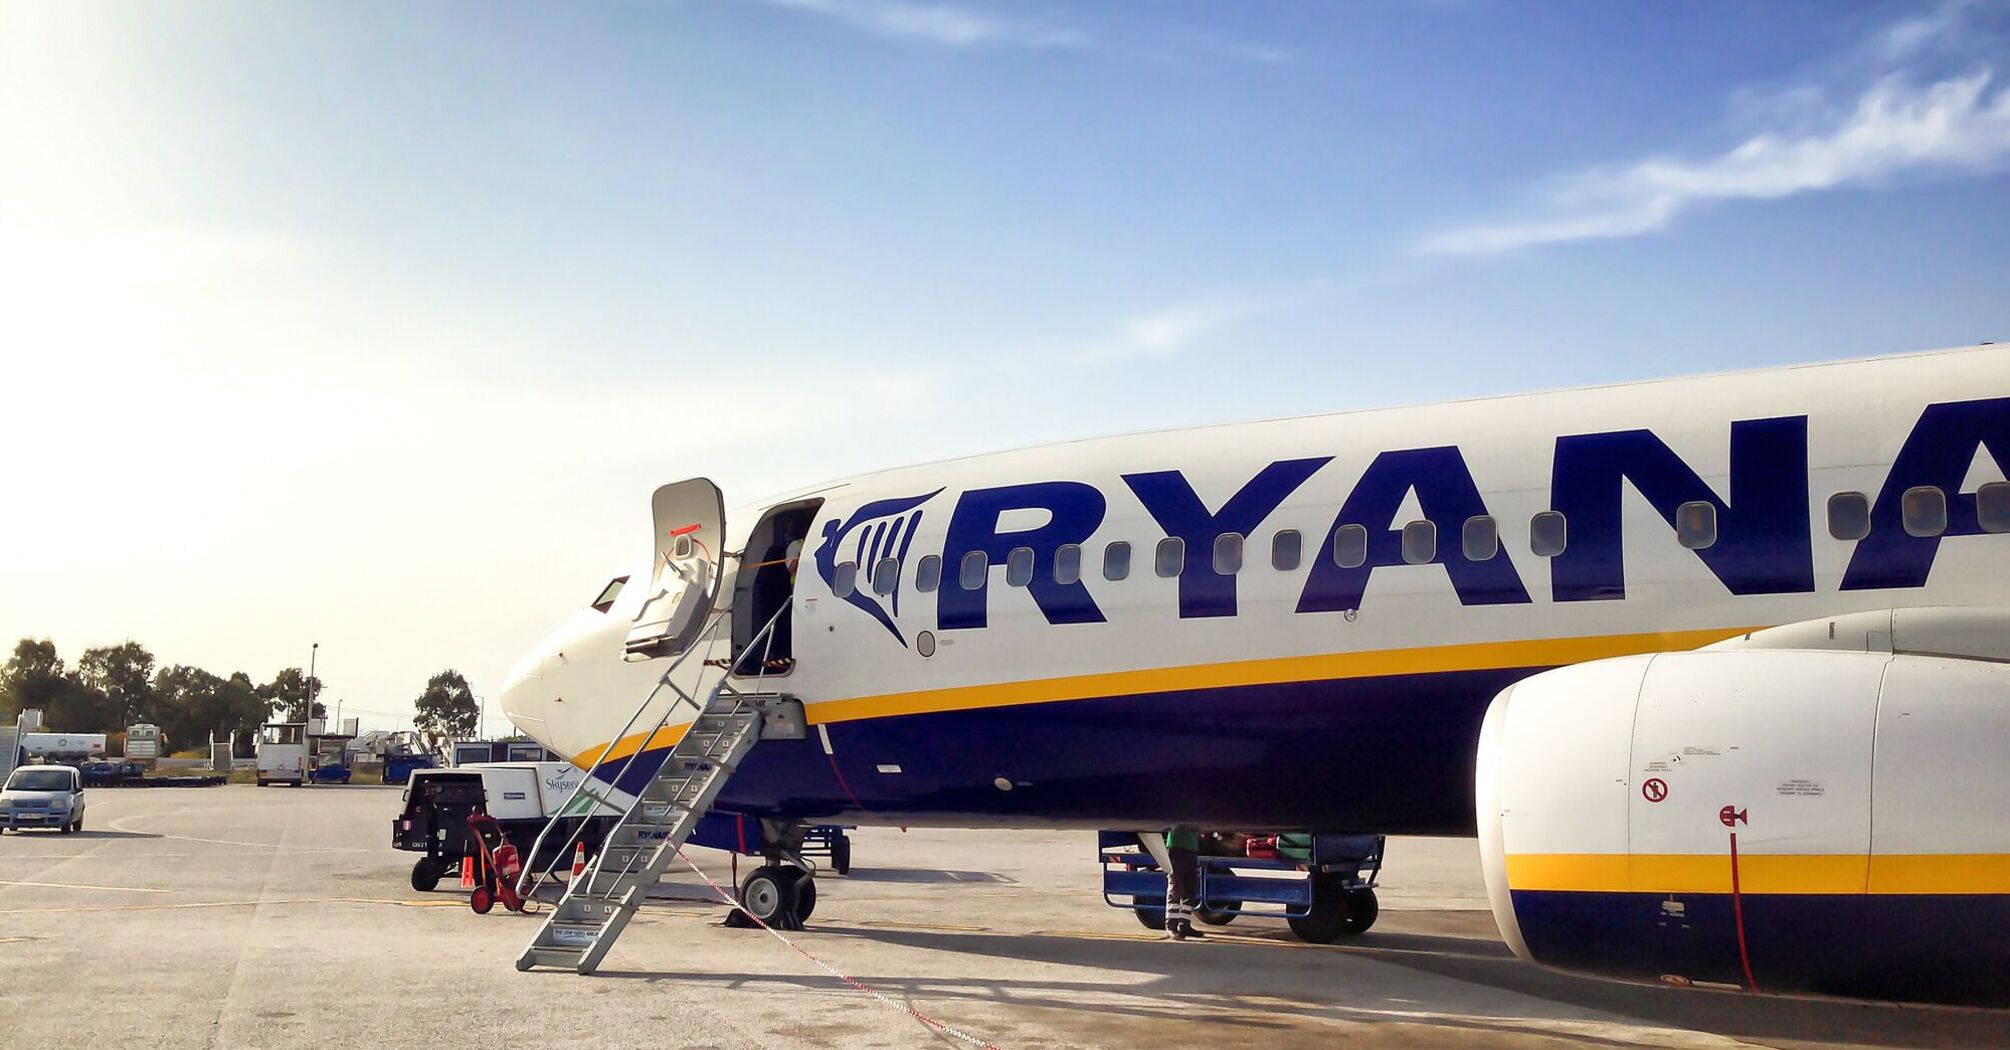 Ryanair aircraft parked at an airport with open boarding stairs